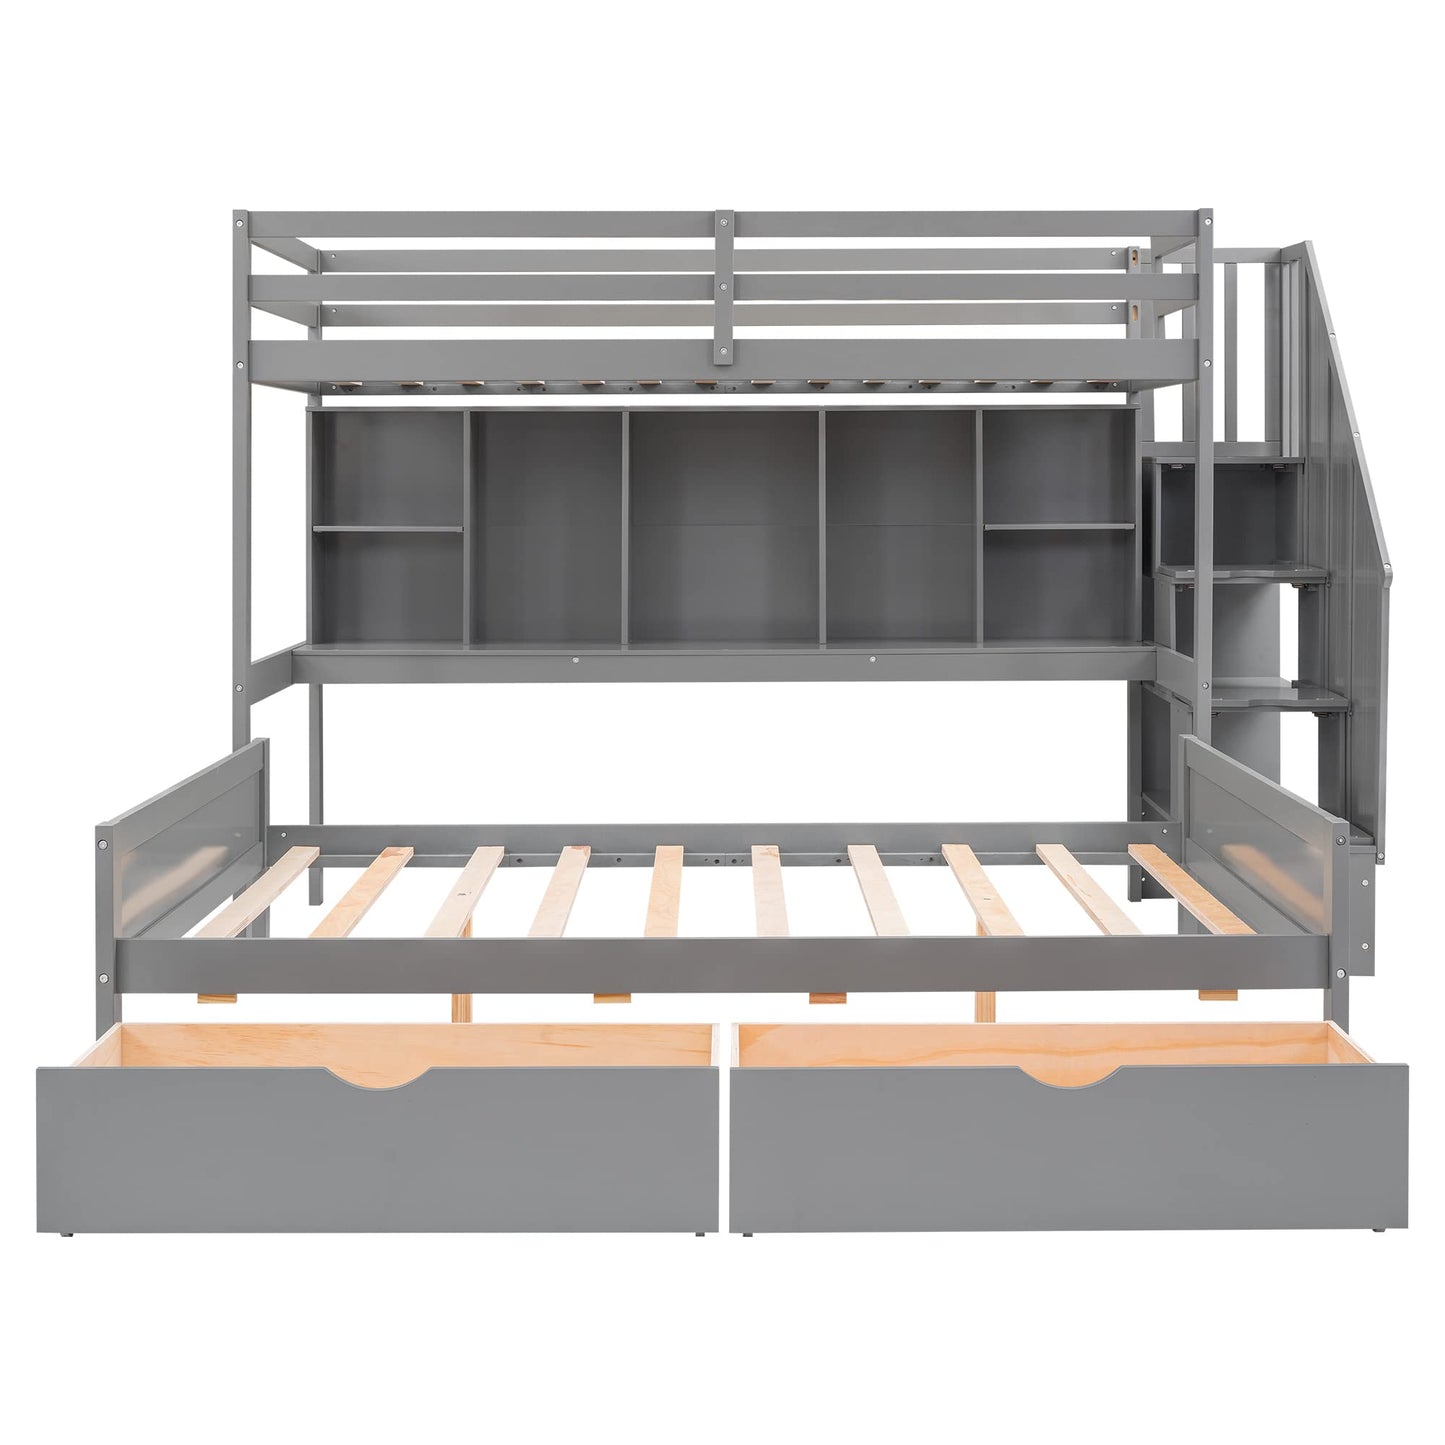 BIADNBZ Multifunctional Solid Wood Bunk Beds Twin XL Over Full Size with Stairs, Built-in Storage Shelves and Desk, Movable Down Bedframe with 2 Drawers, for Kids Teens Adults Bedroom, Gray